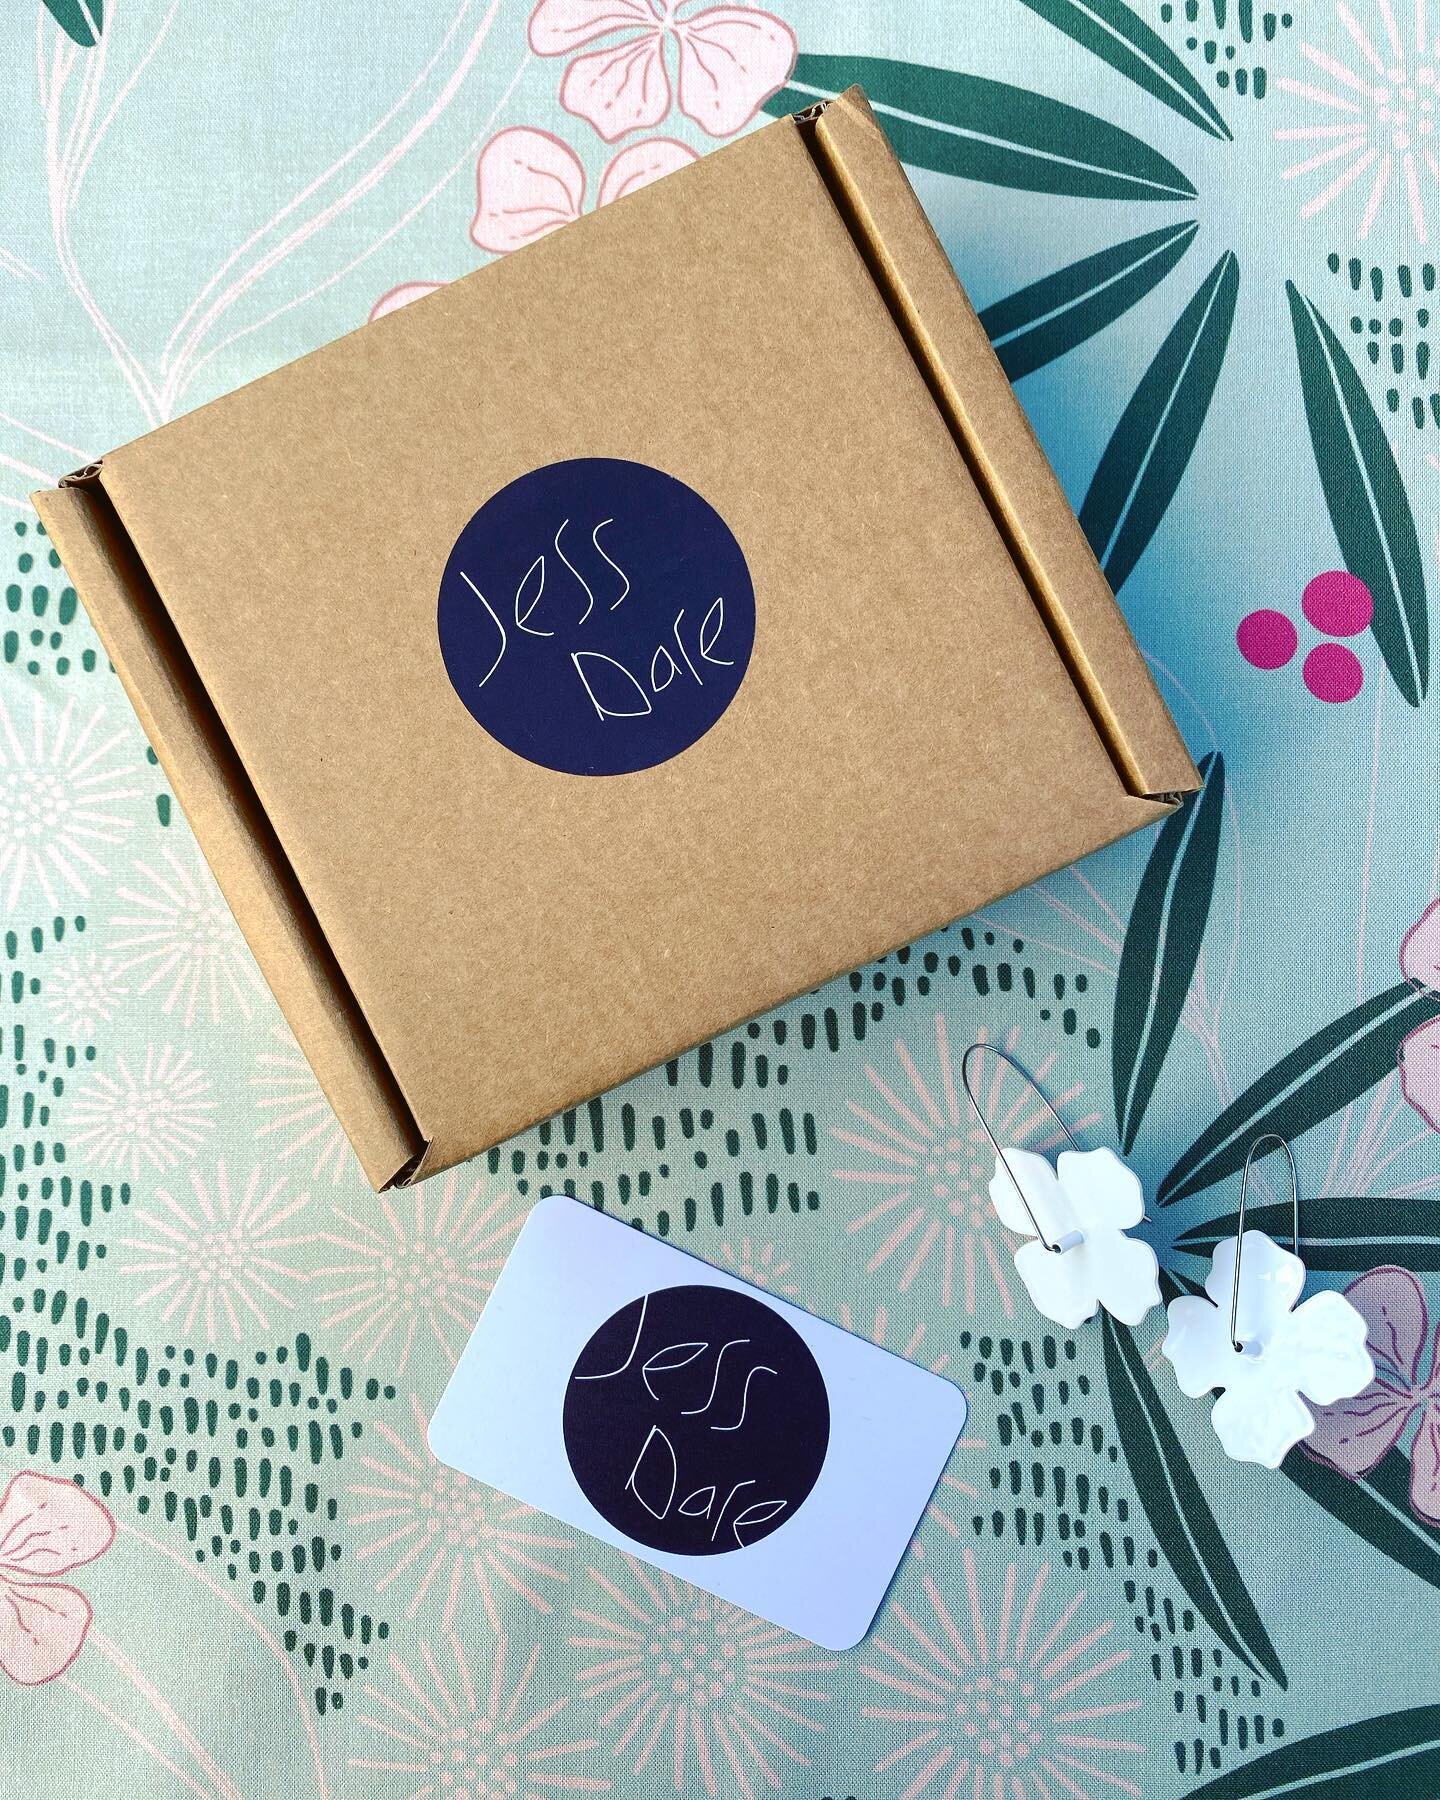 Webstore is up and running with the first orders in the post!

#australiancontemporaryjewellery #flowerpatch #jessdare #jewellery #earrings #handmade #supportsmallbusiness #supportthearts